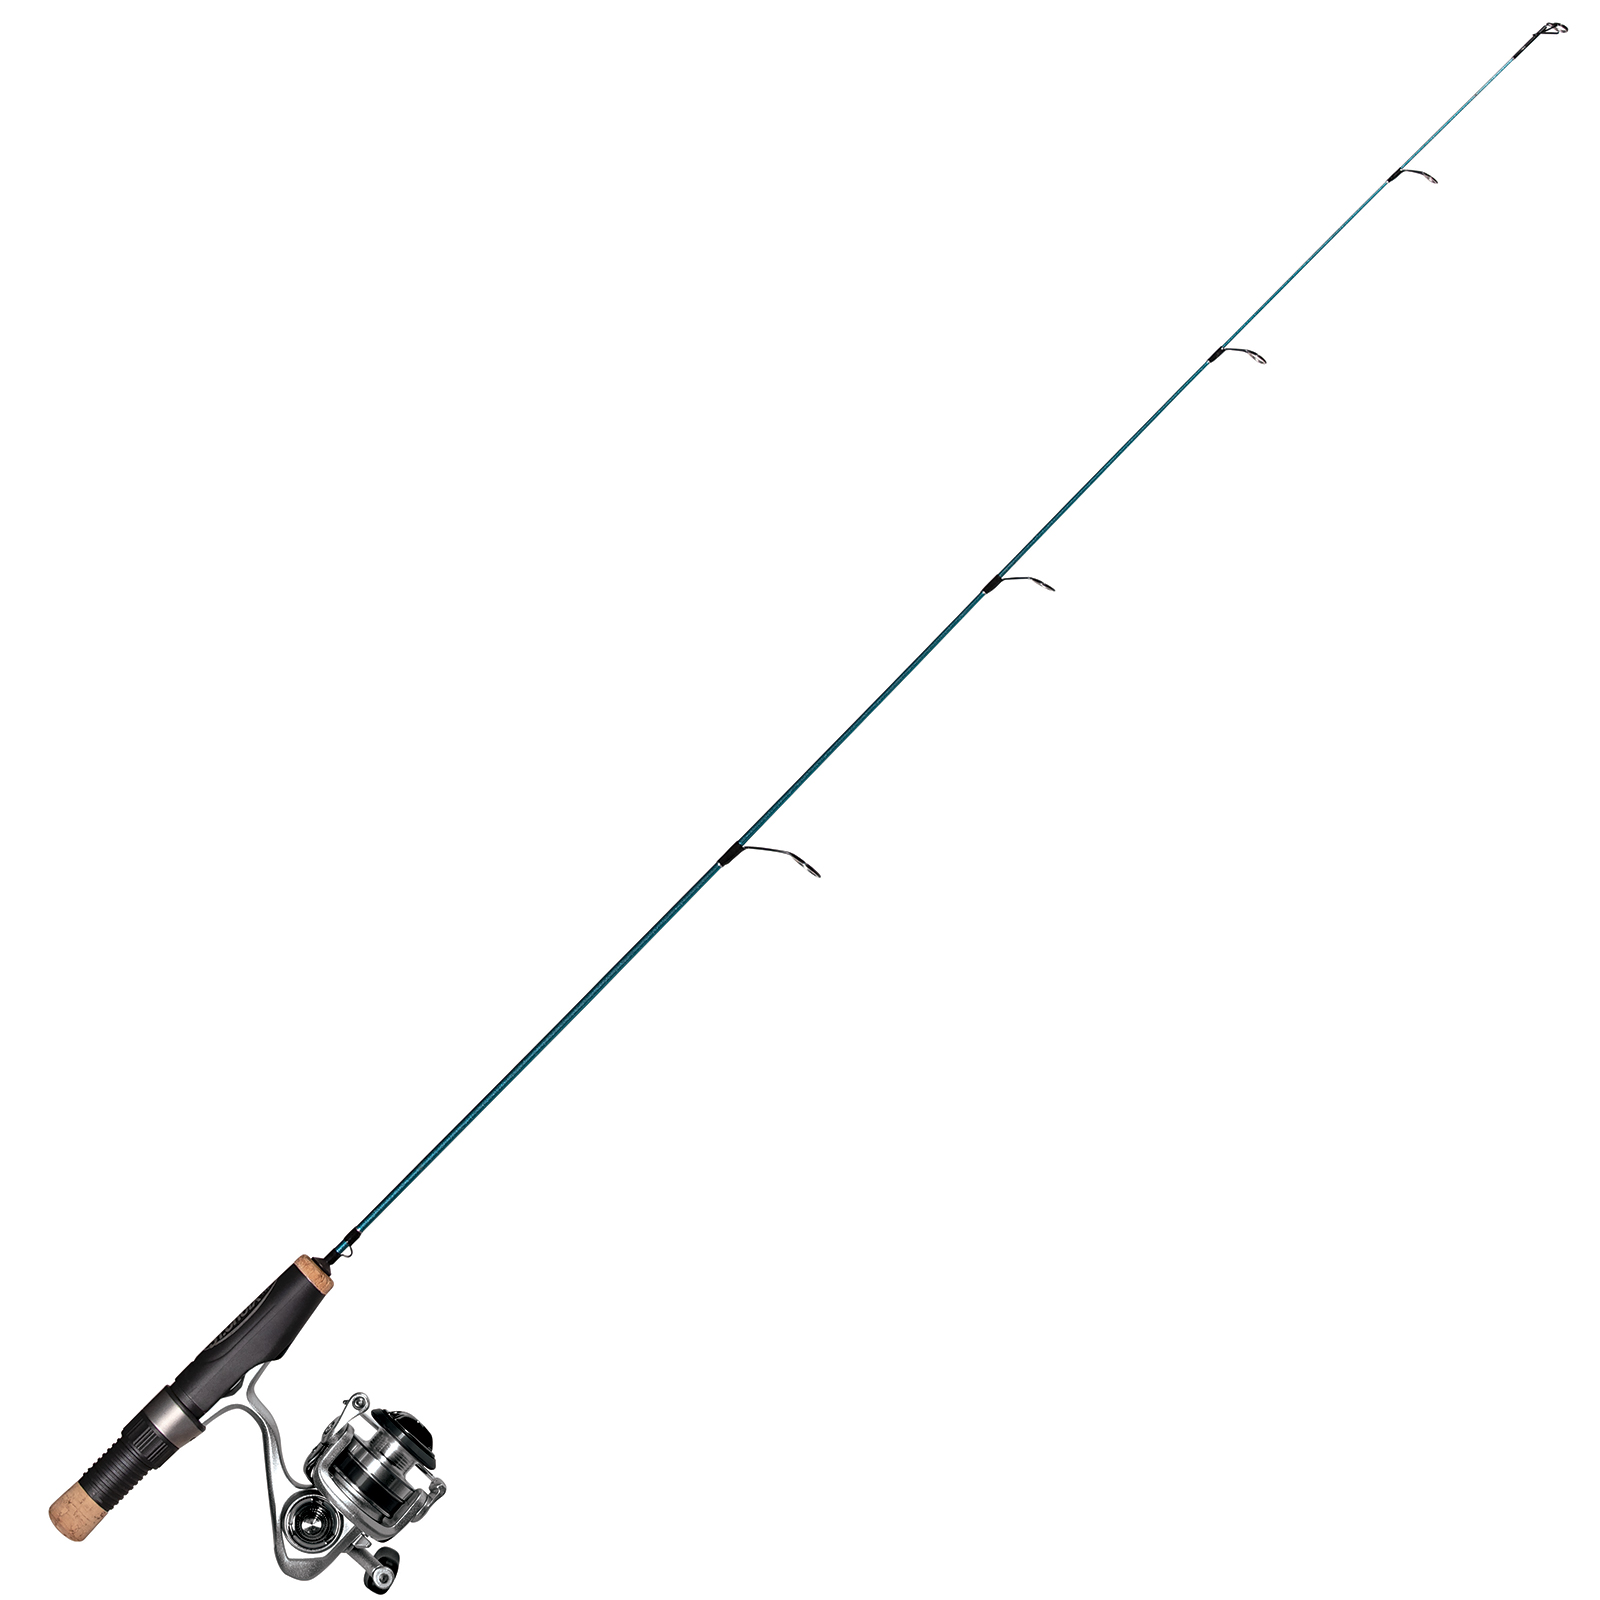 St. Croix Graphite Ice Fishing Rod Fishing Rods & Poles for sale